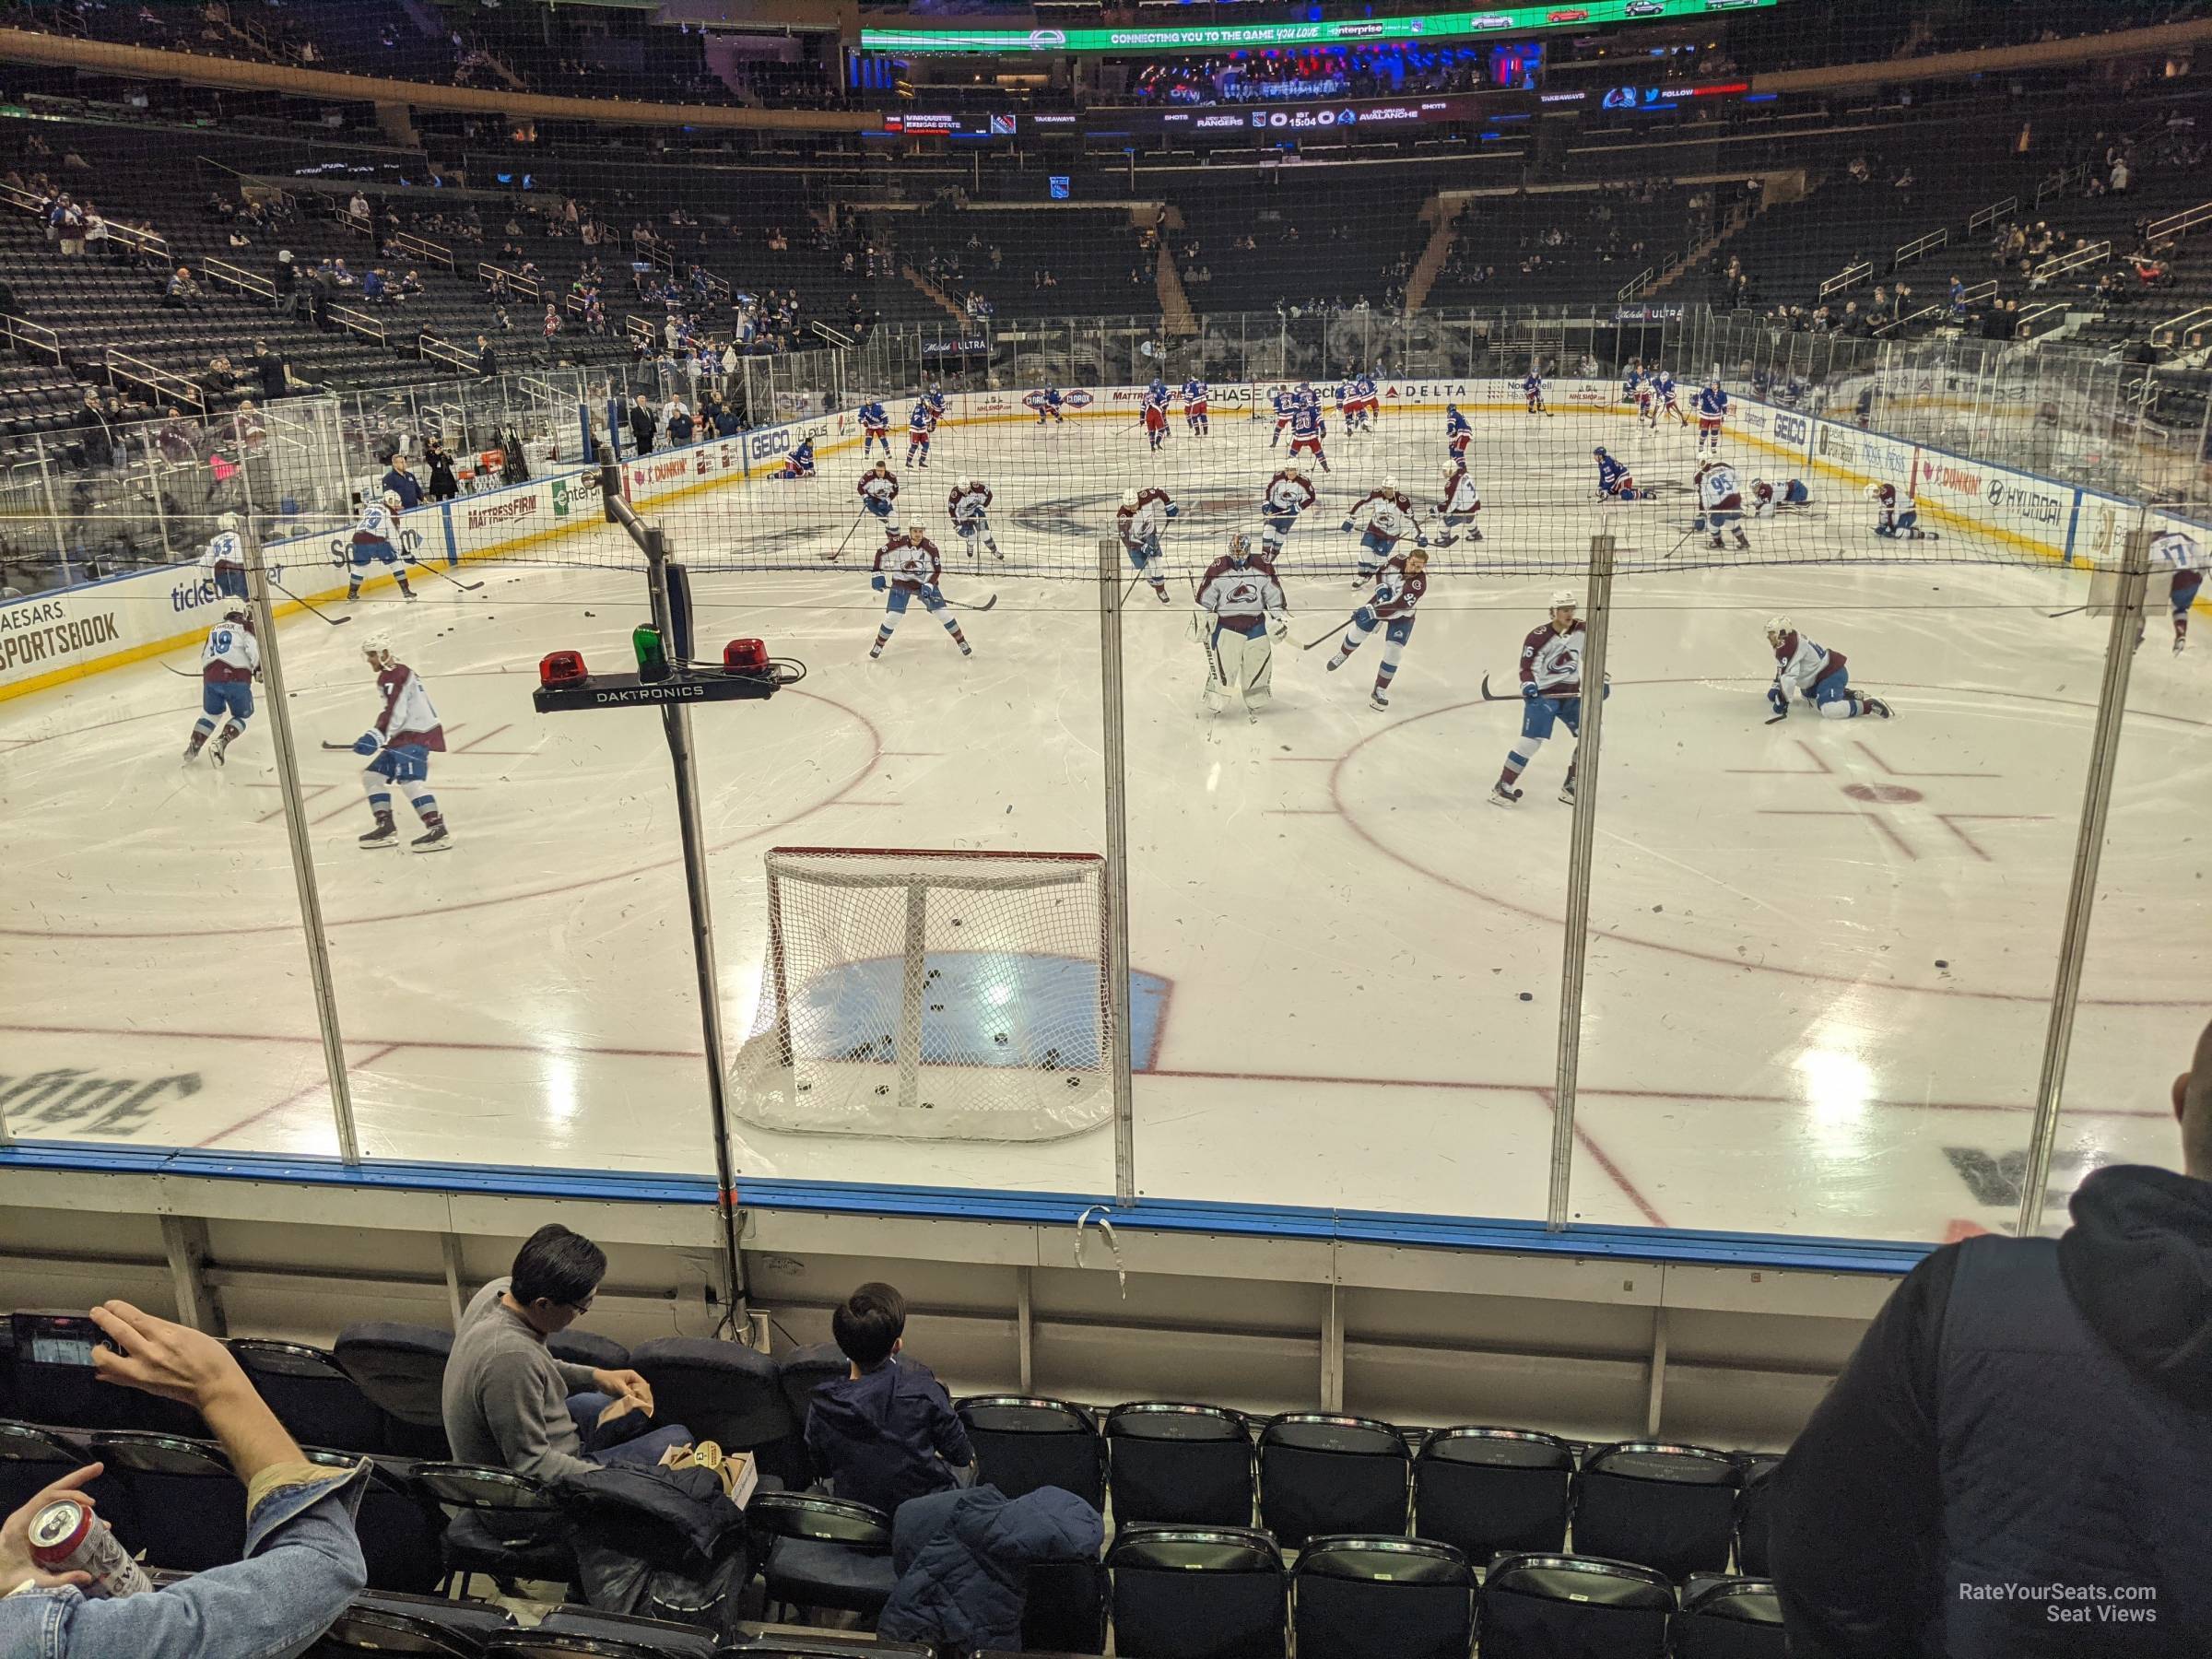 section 8, row 5 seat view  for hockey - madison square garden